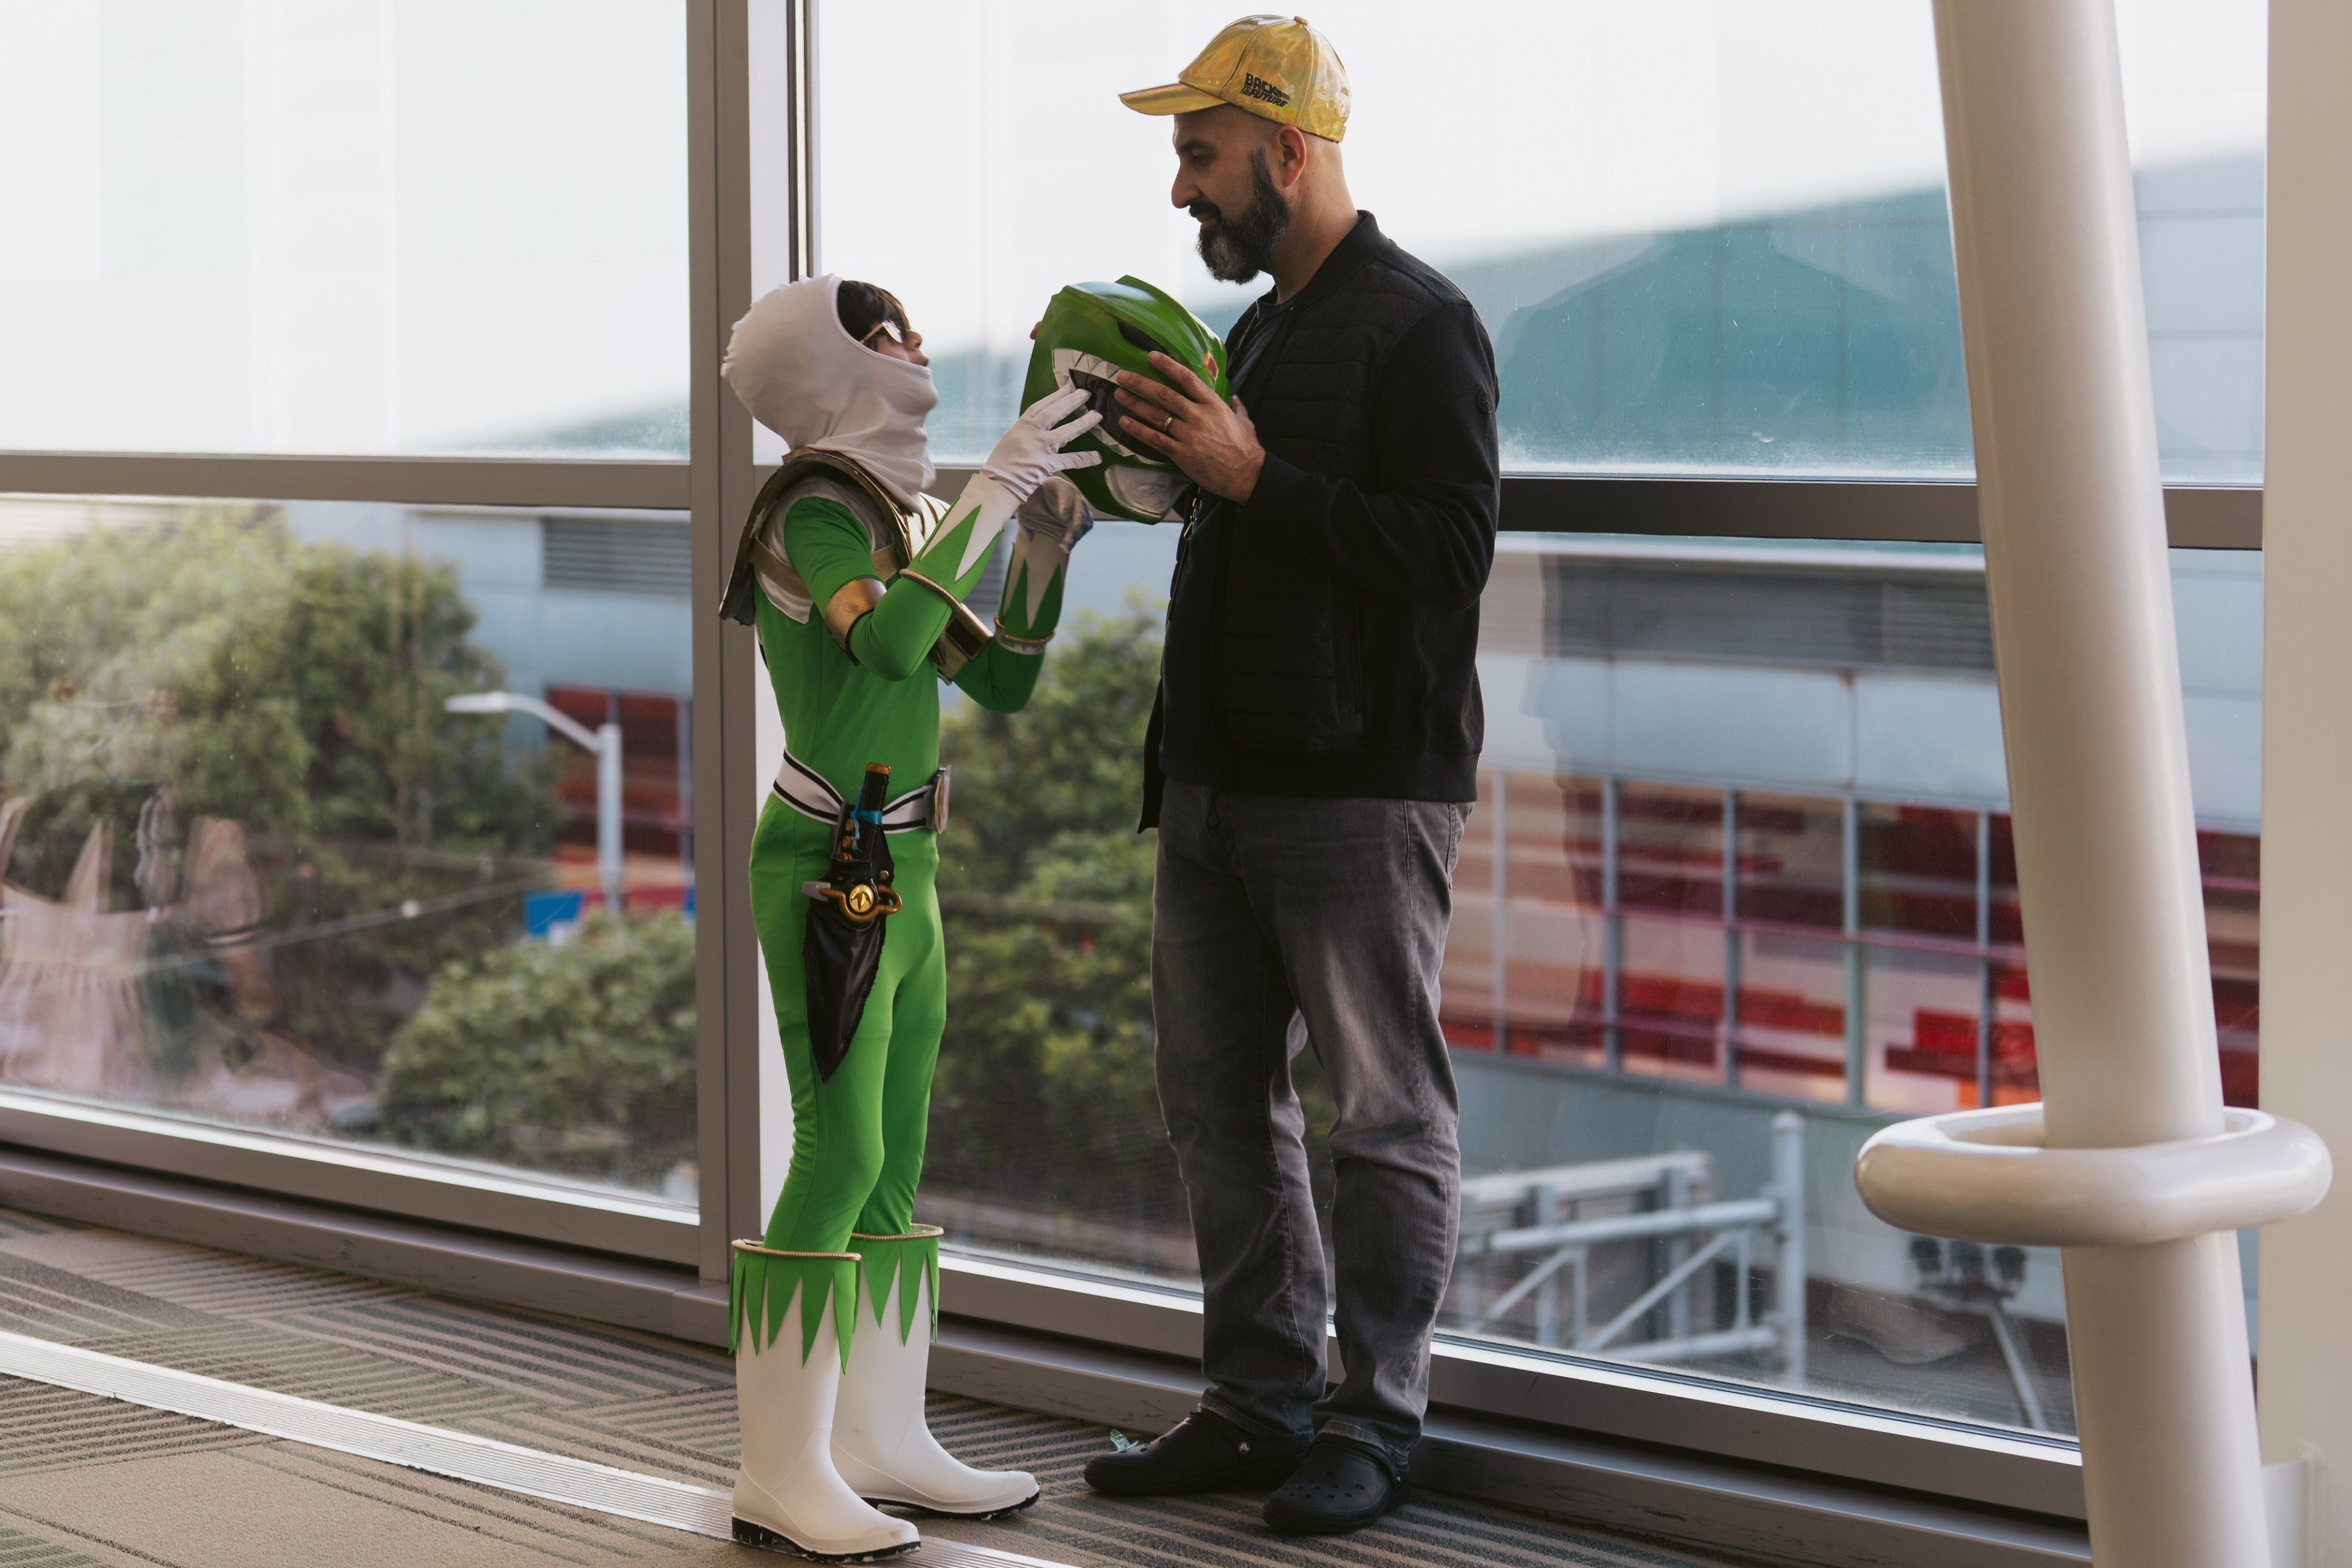 A child dresses as a superhero hands their mask to a man during a cos play event.